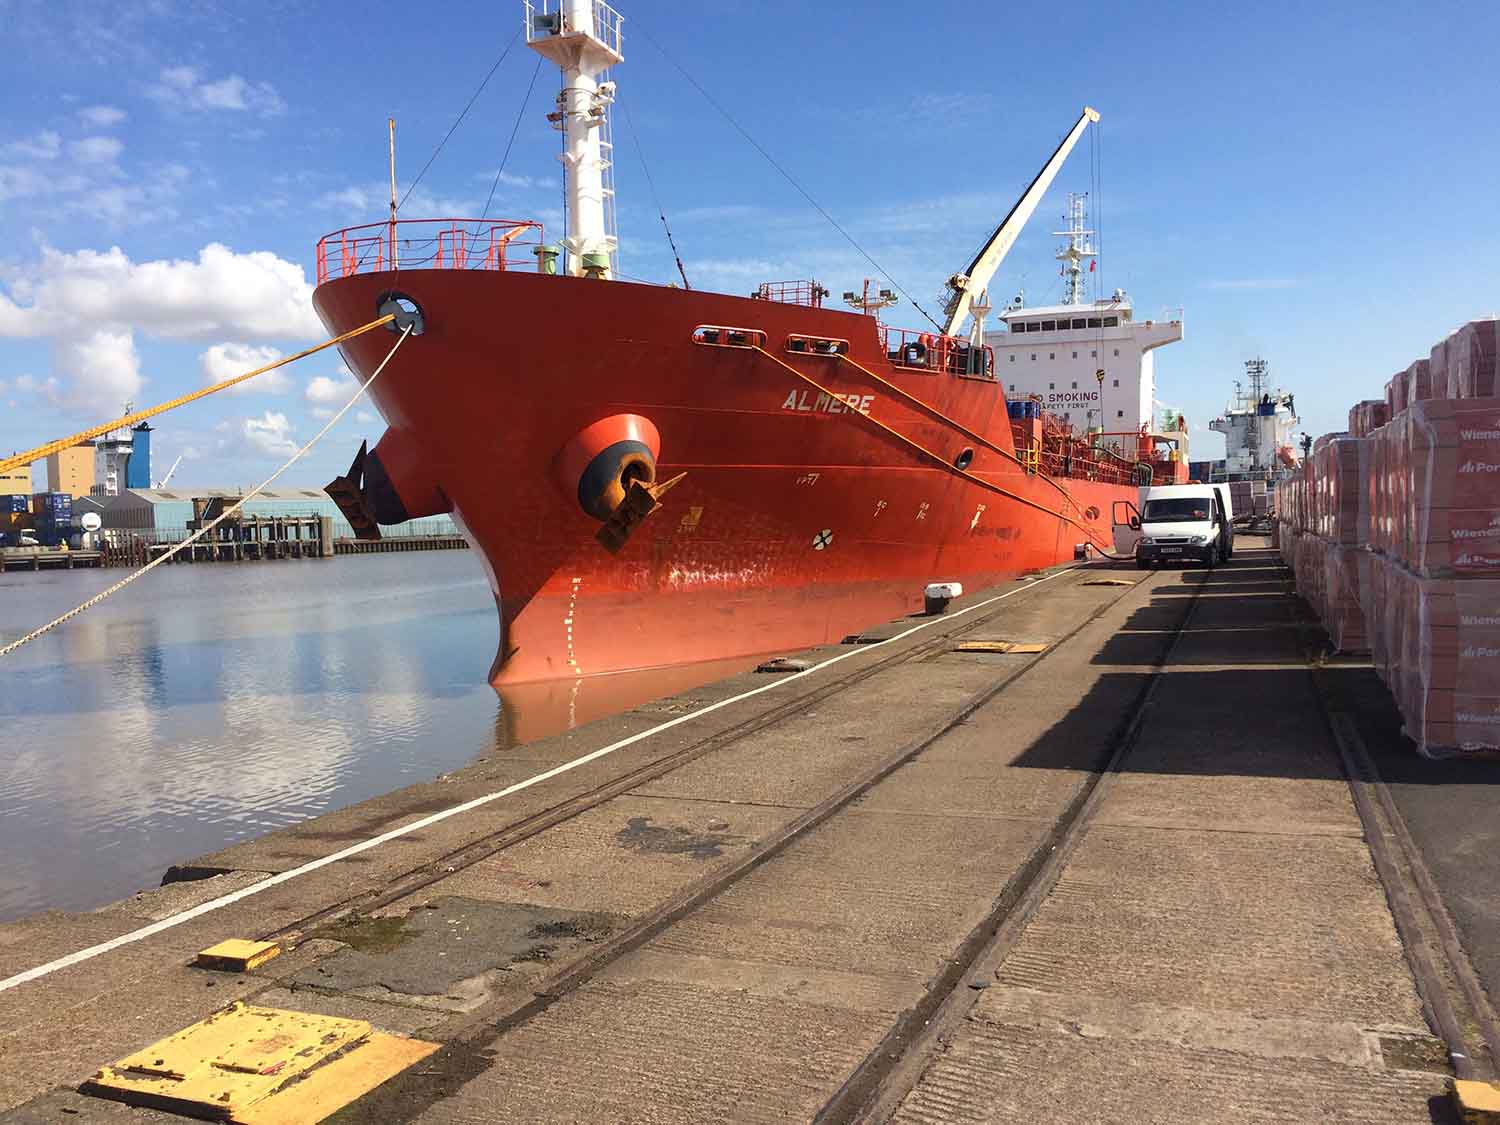 A colour image of the Almere tanker docked , the tanker used for the Almere trial to validate Forecast Technology'sDNA Tracer technologies